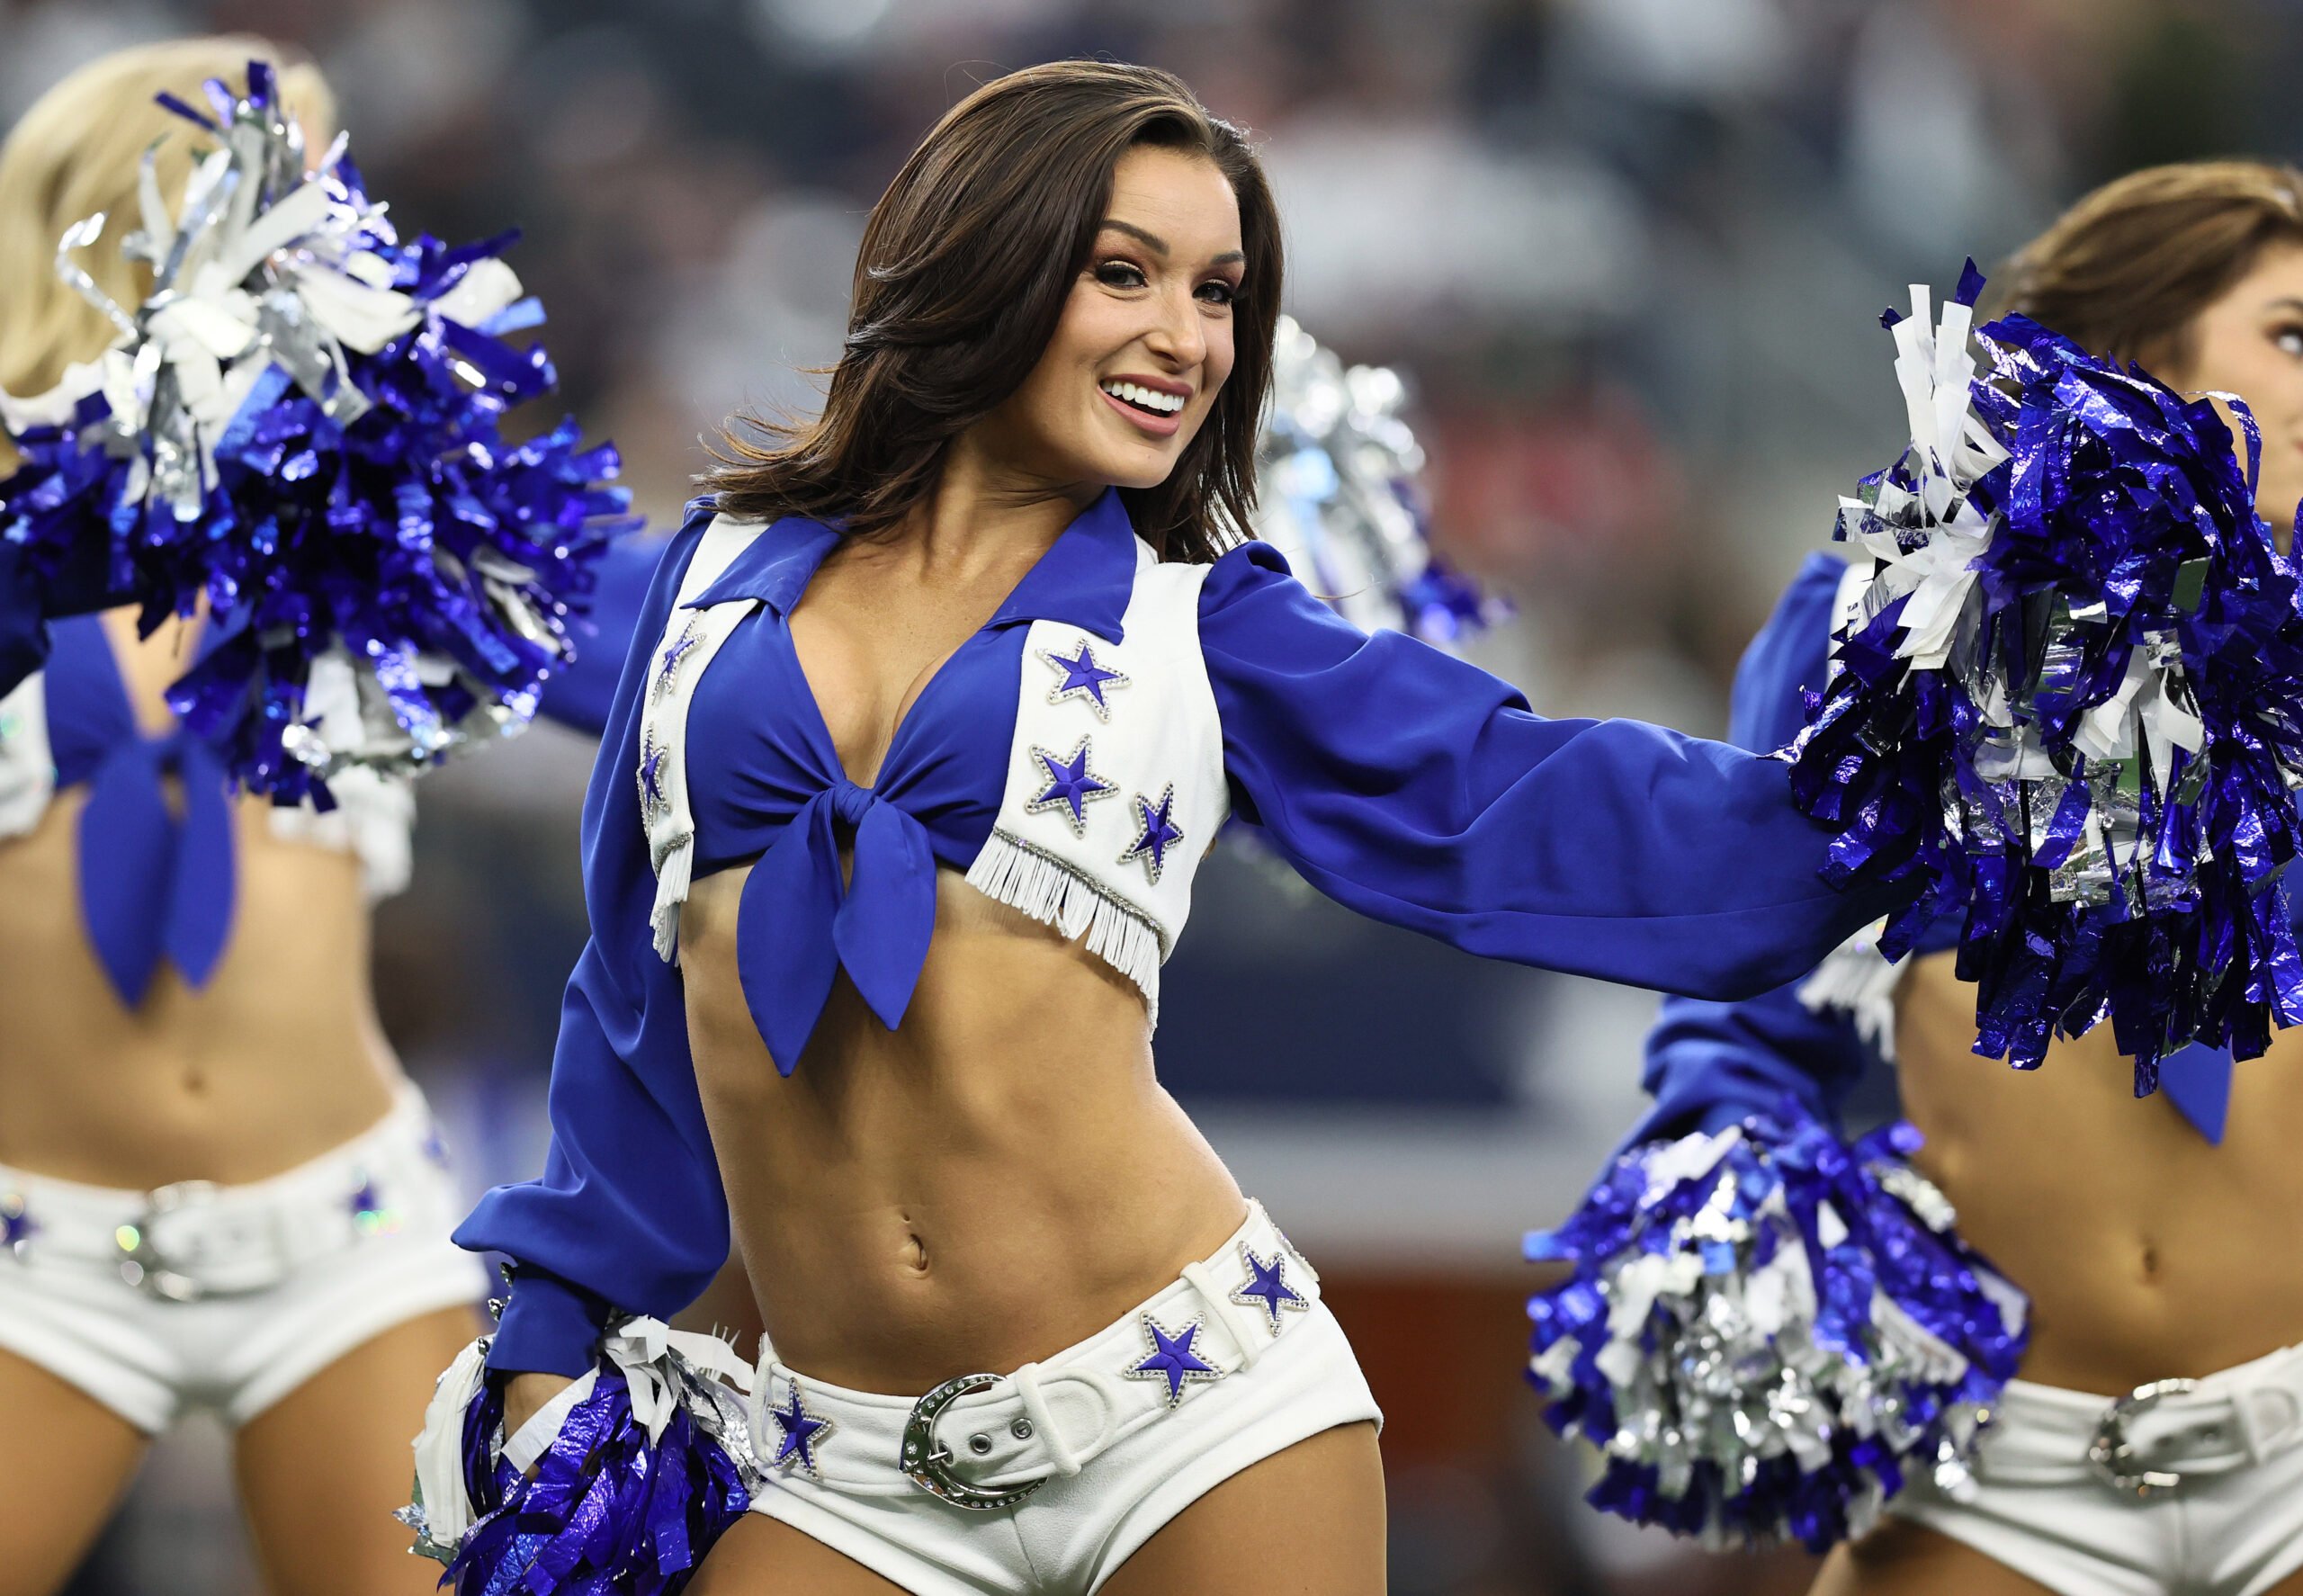 The NFL should be ashamed of their cheerleader treatment.